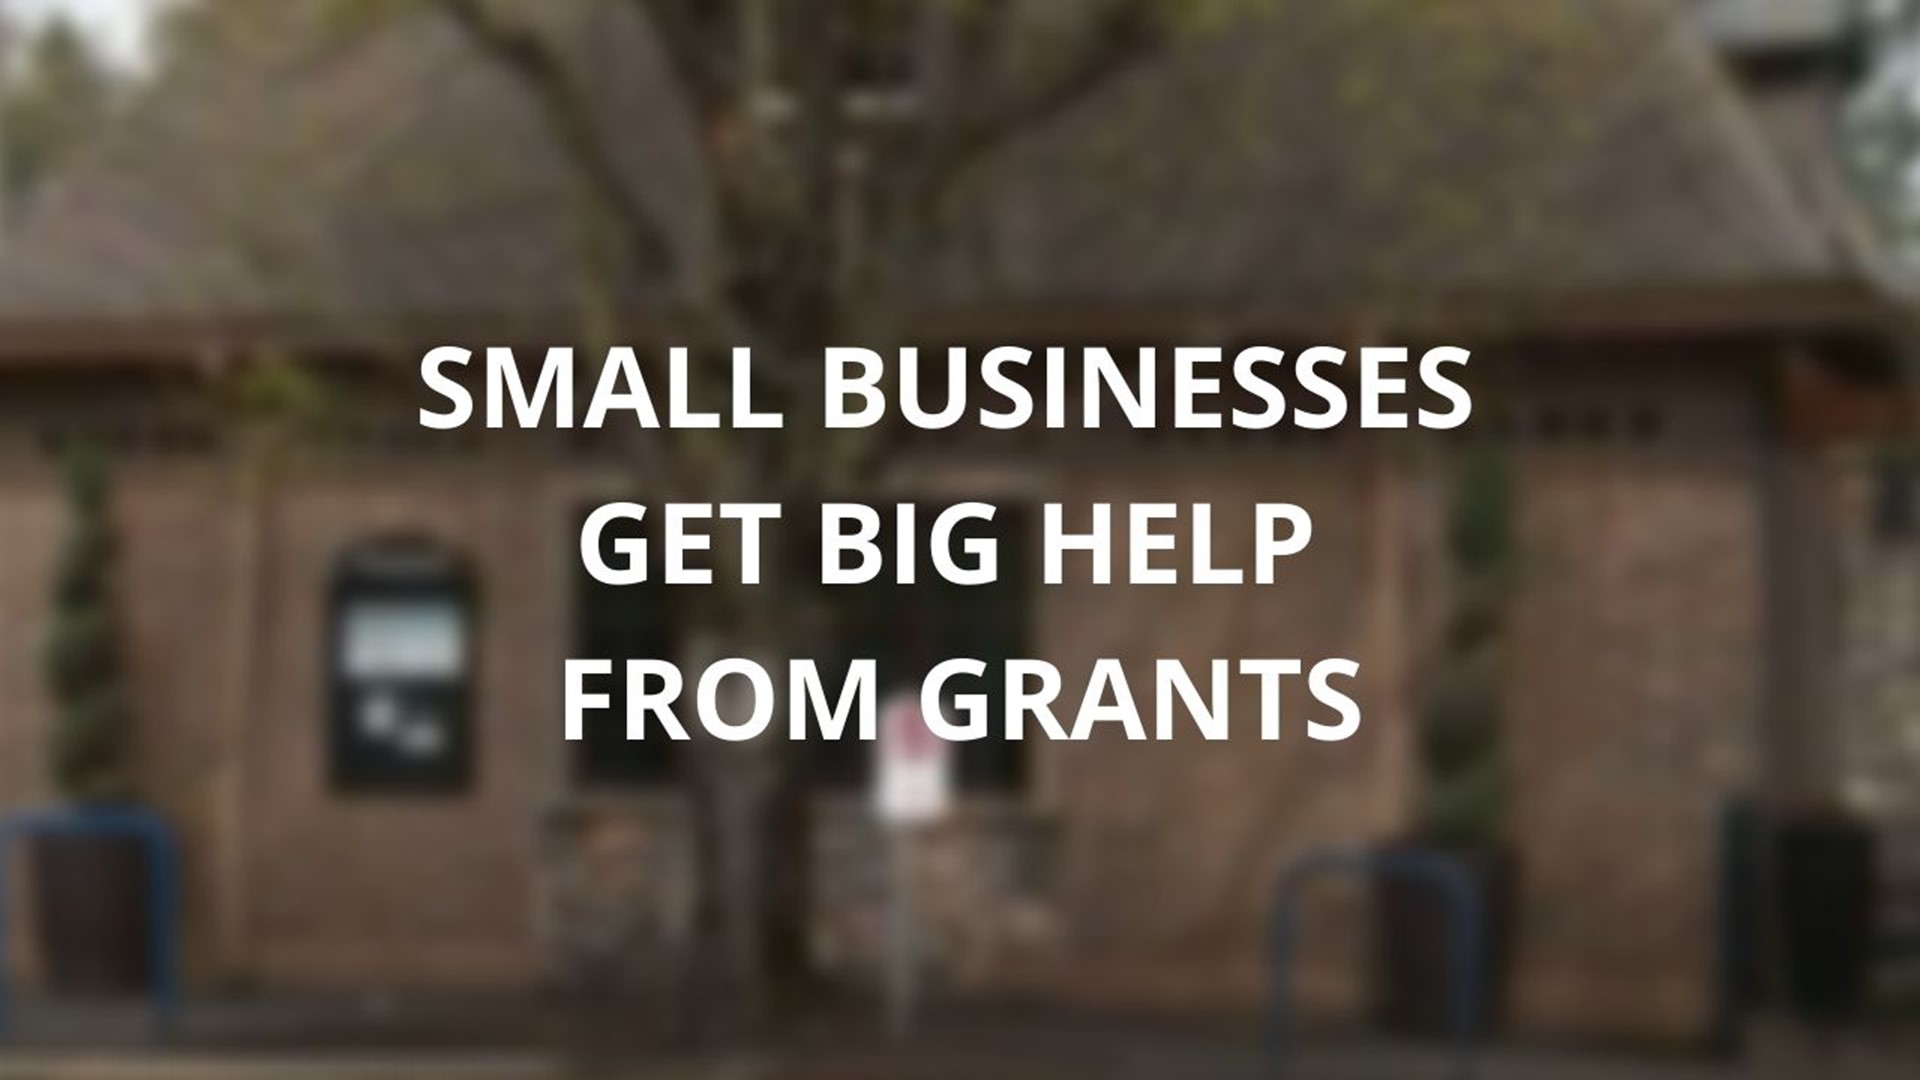 Portland businesses found out they received a grant that will help them stay open for now.